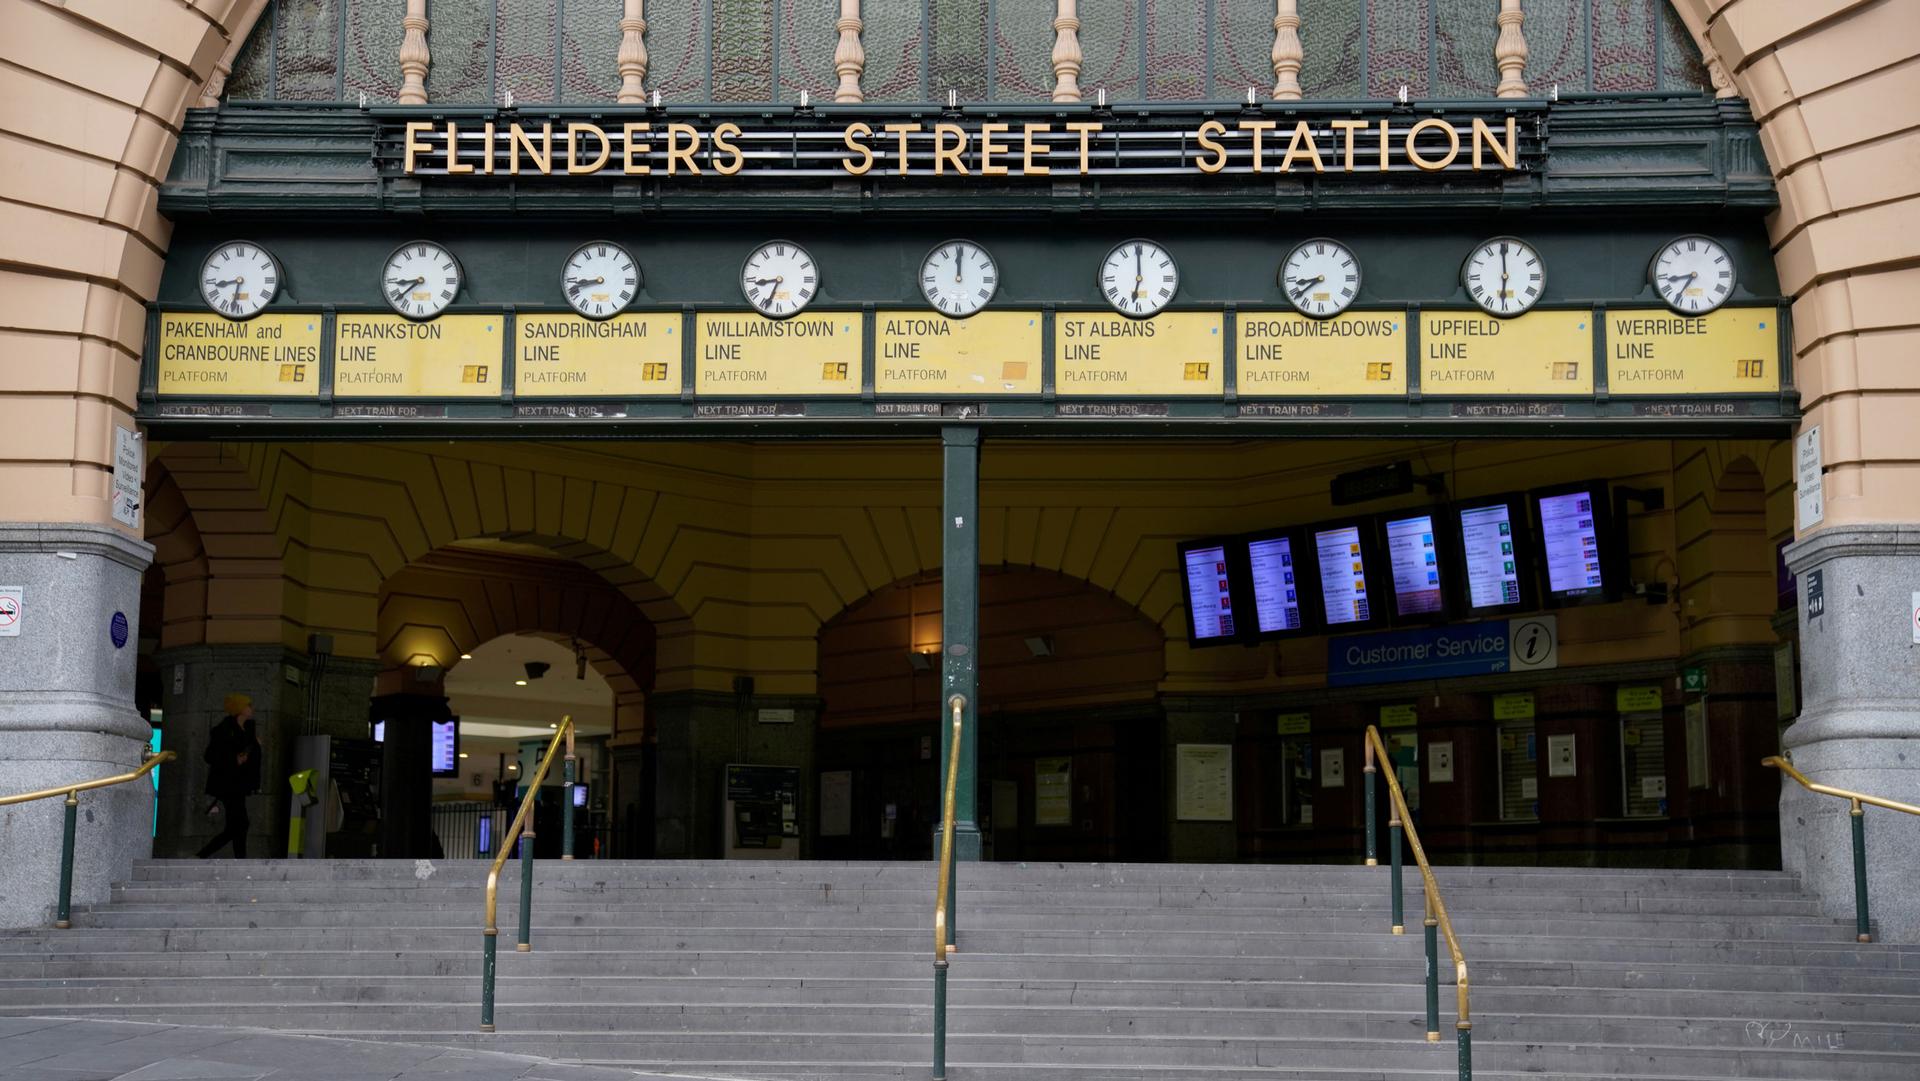 The entrance to Flinders Street train station is shown with nine clocks along the top and nearly empty of people.